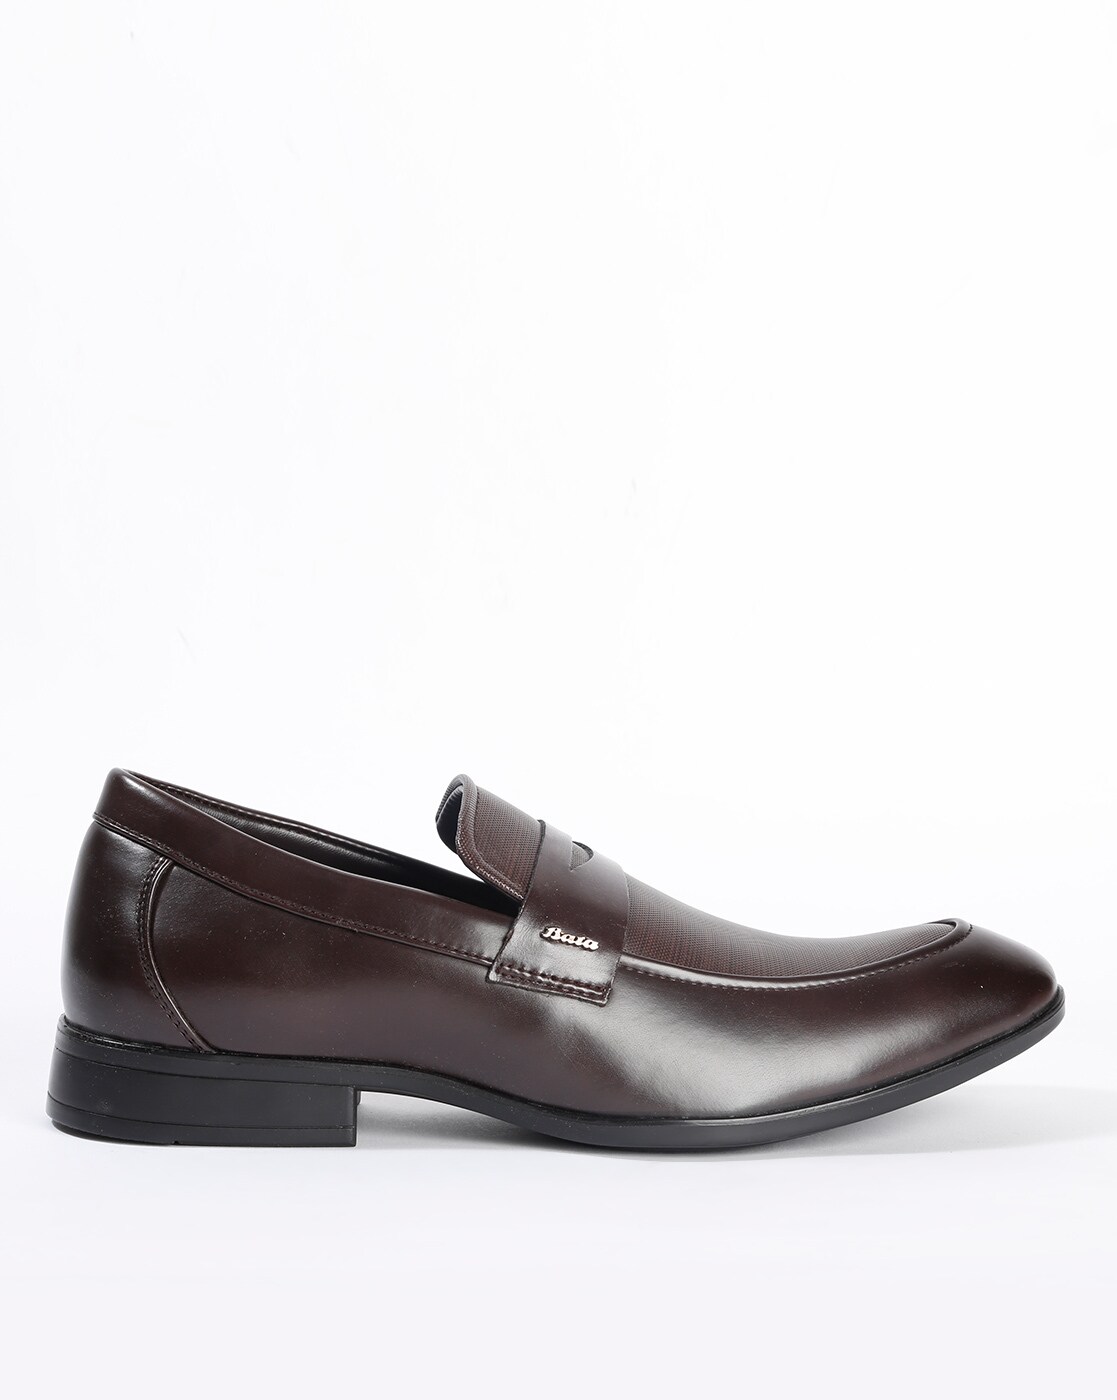 Martino Penny Loafer Formal Shoes